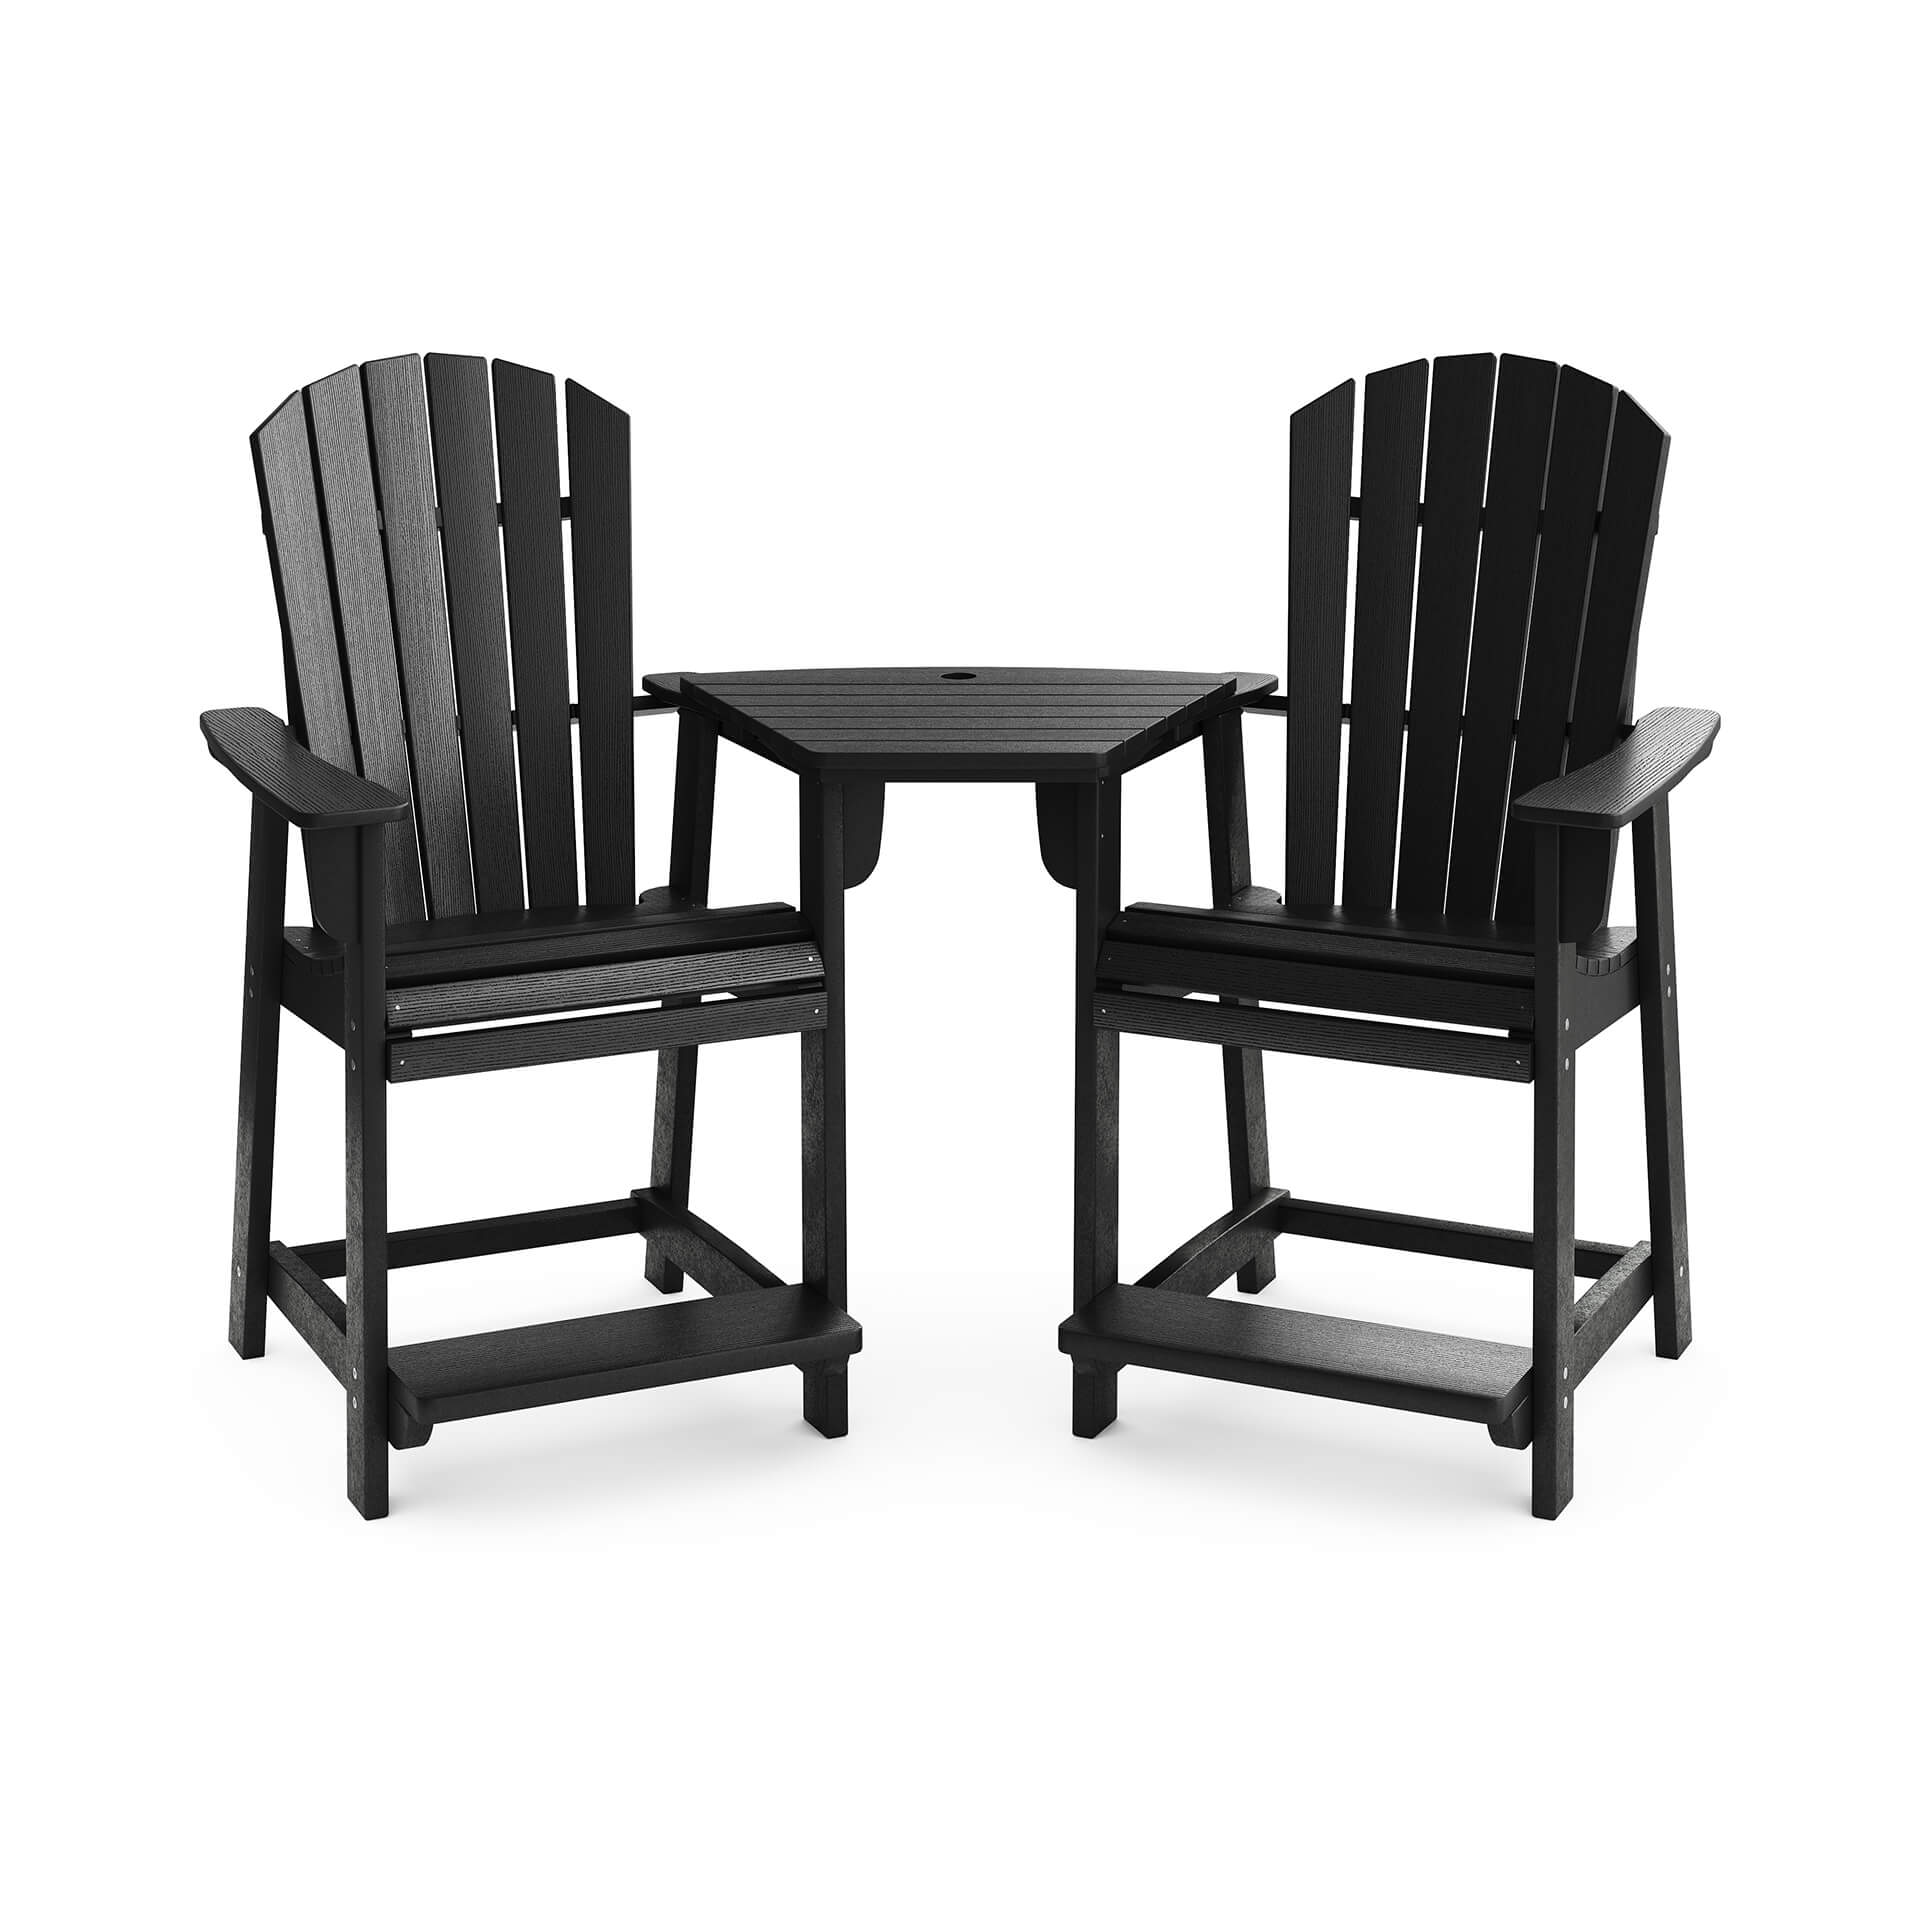 Silo 3D Render of Black Chairs